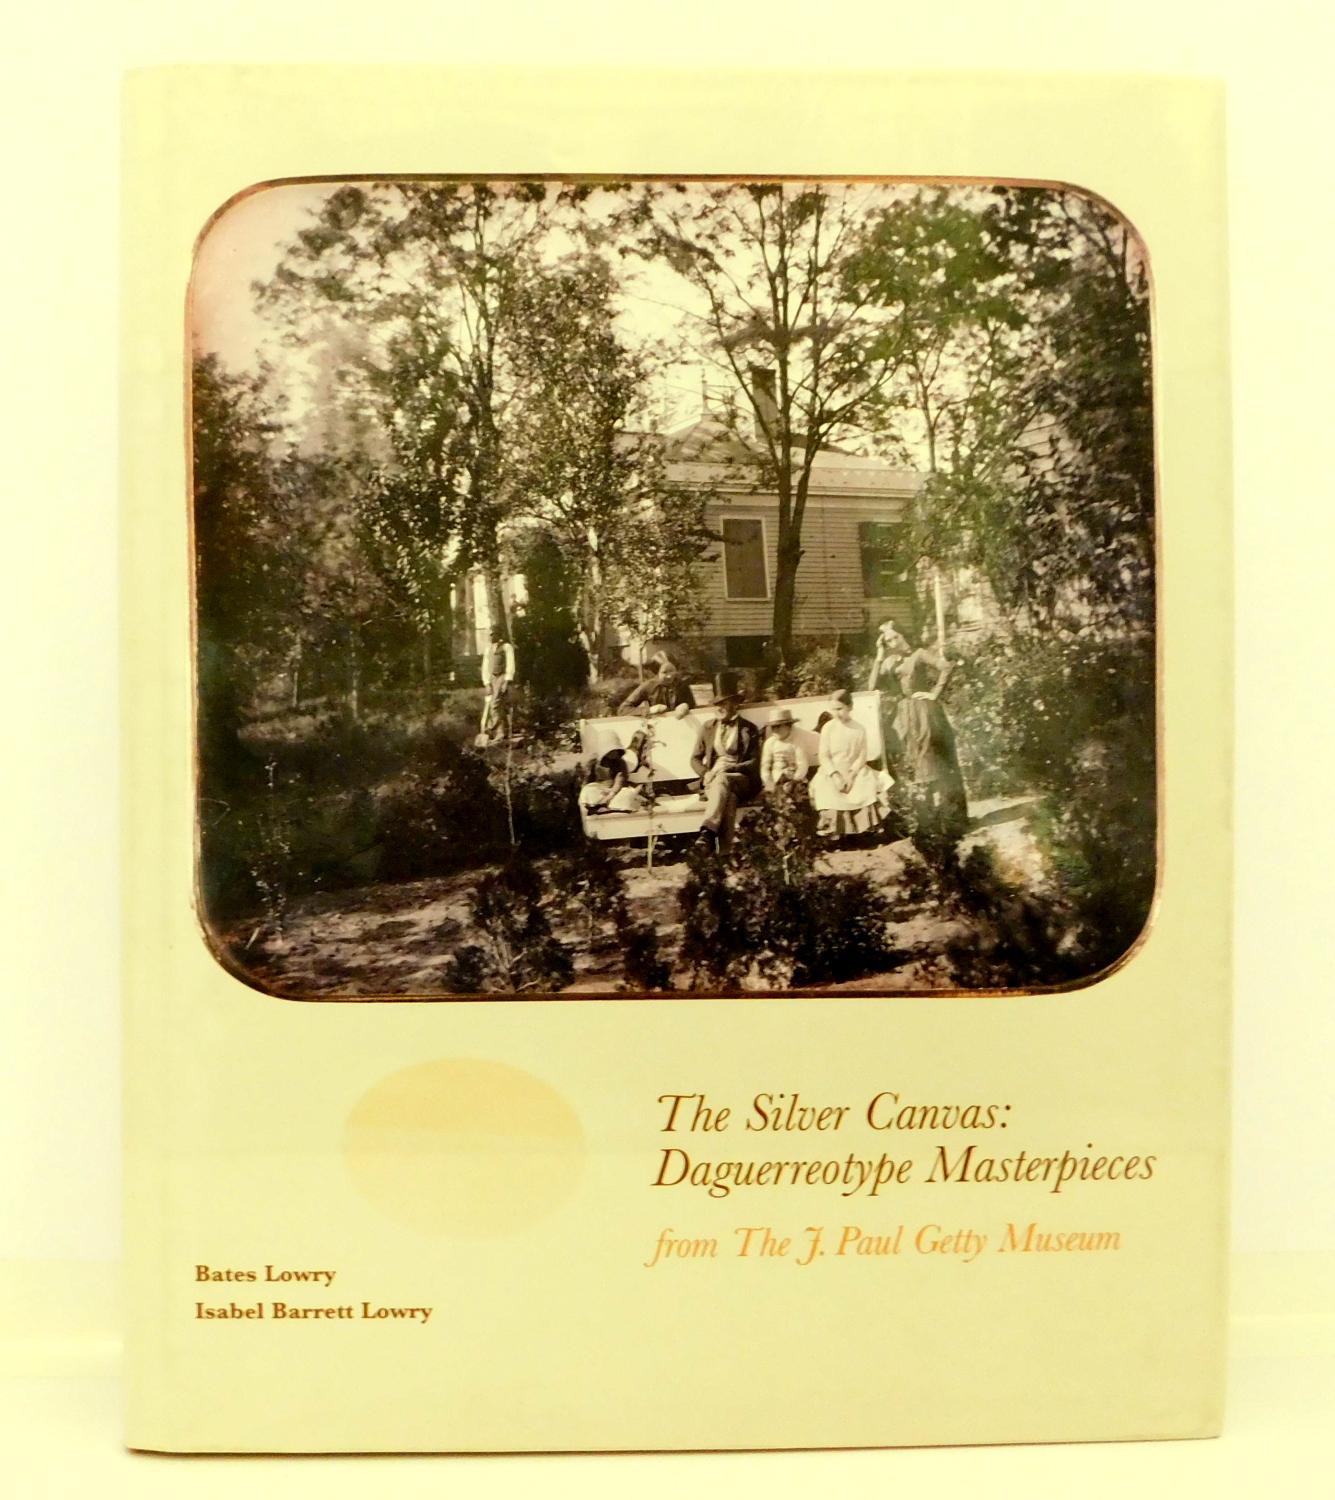 The silver canvas: Selected Daguerreotypes in the J.Paul Getty Museum - Lowry, Bates & Lowry, Isabel Barrett